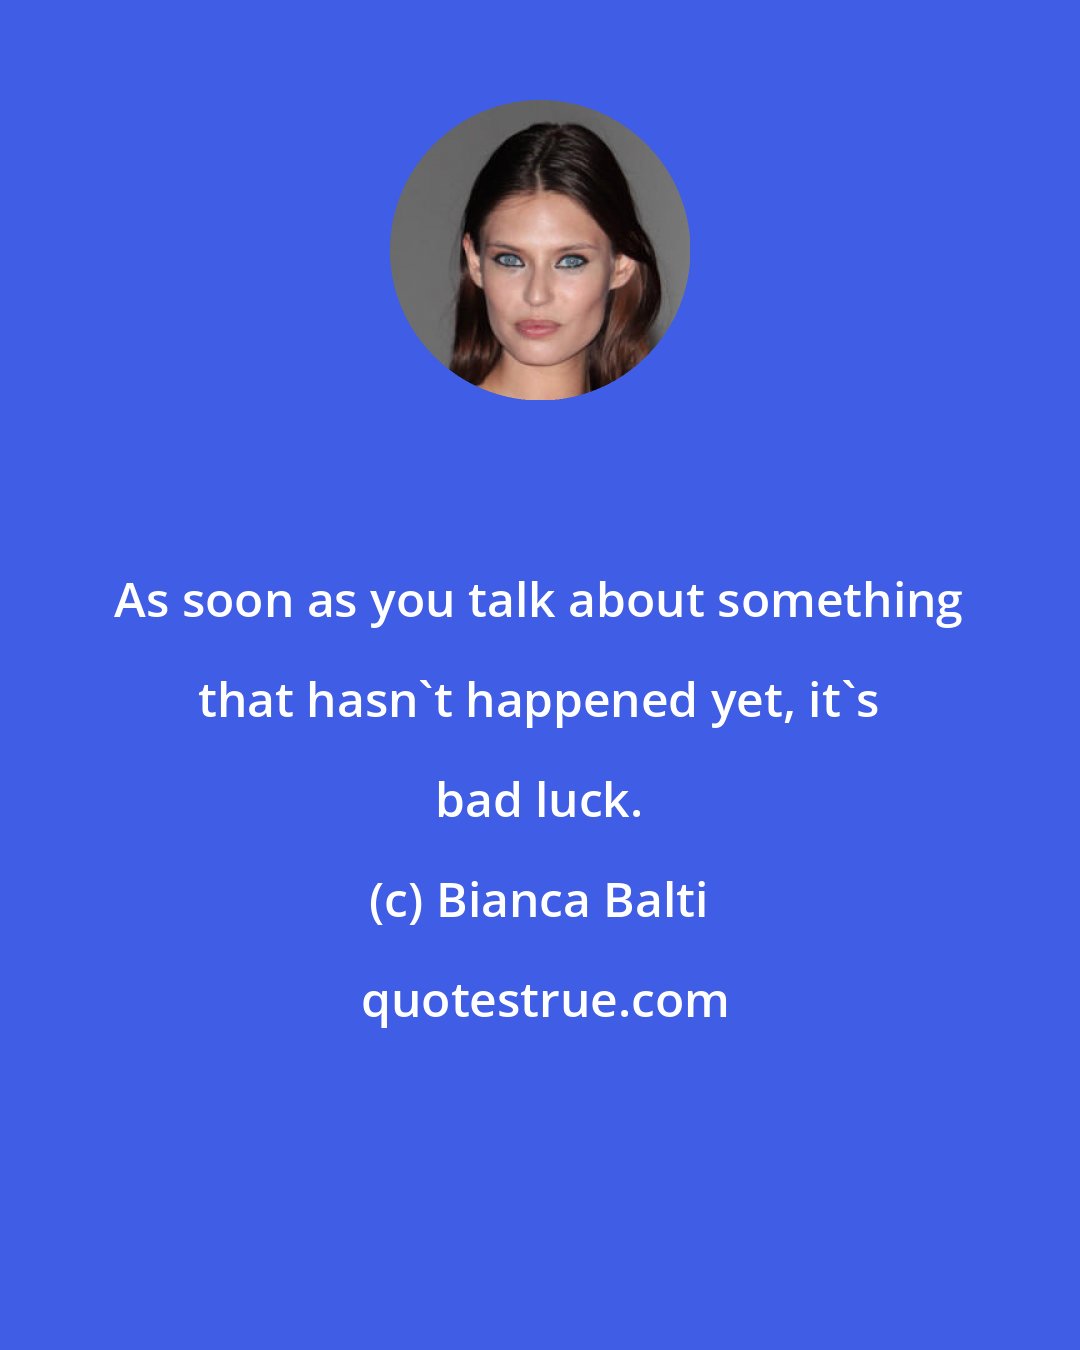 Bianca Balti: As soon as you talk about something that hasn't happened yet, it's bad luck.